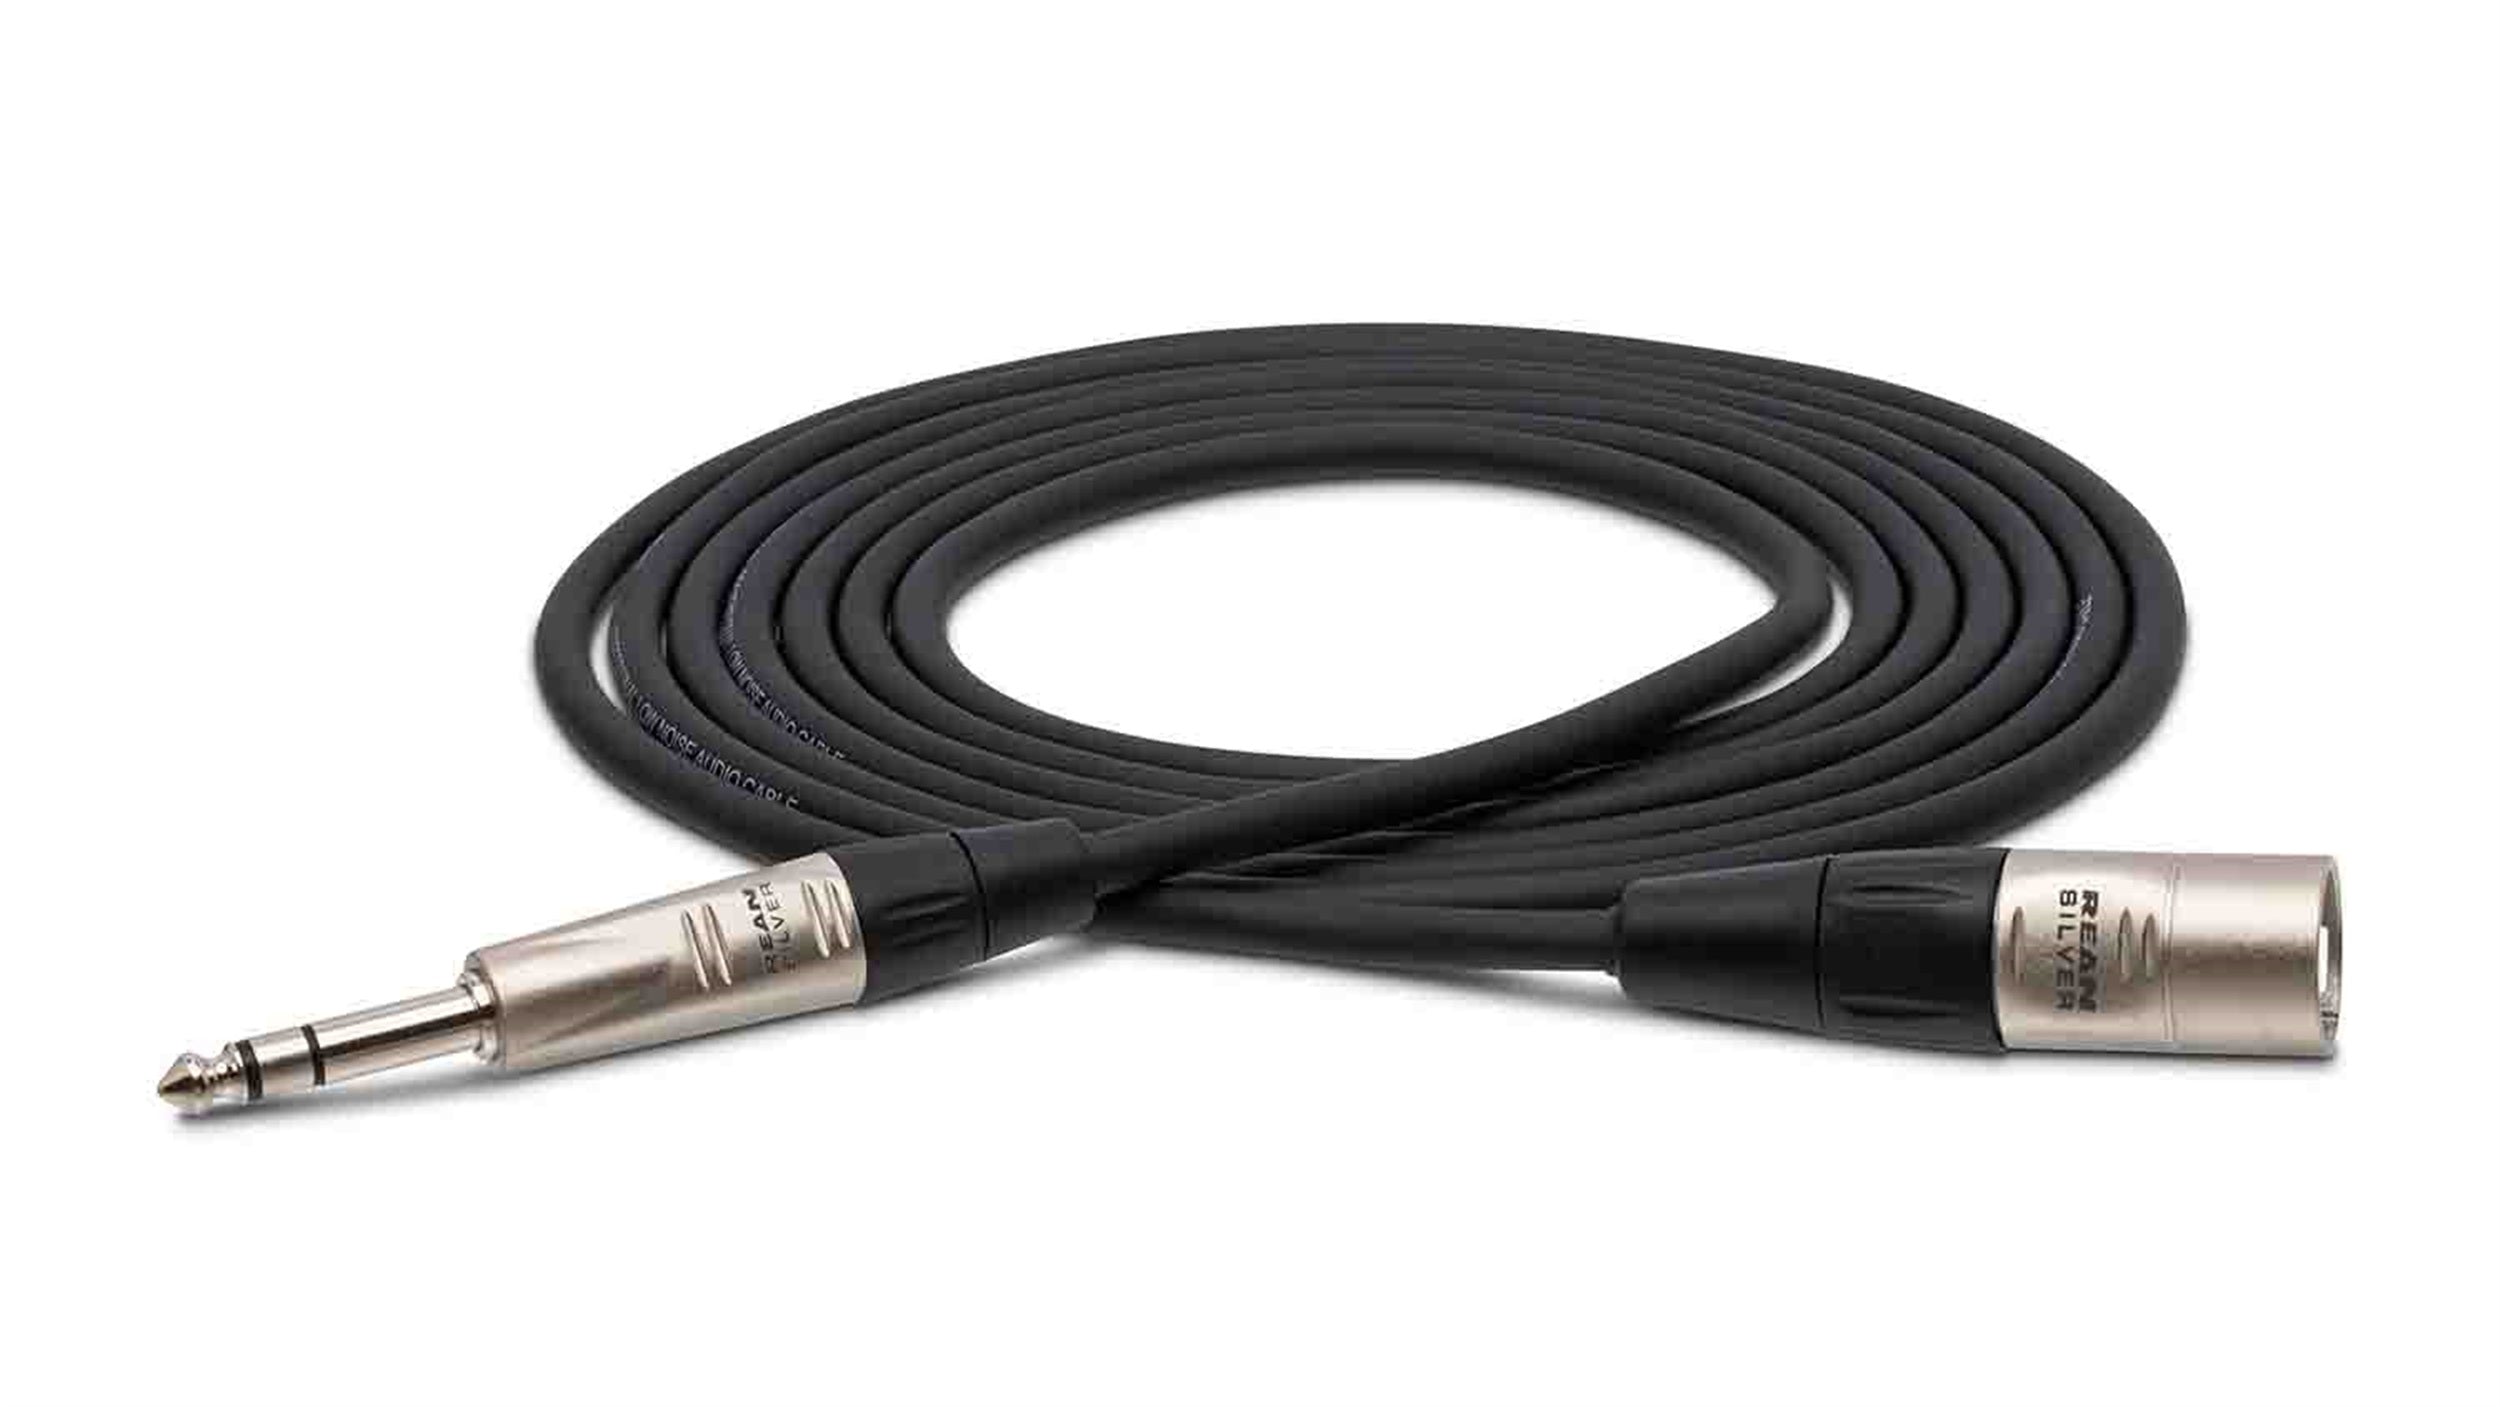 Hosa HSX-030, 1/4" TRS to XLR3M Pro Balanced Interconnect Cable - 30 Feet by Hosa